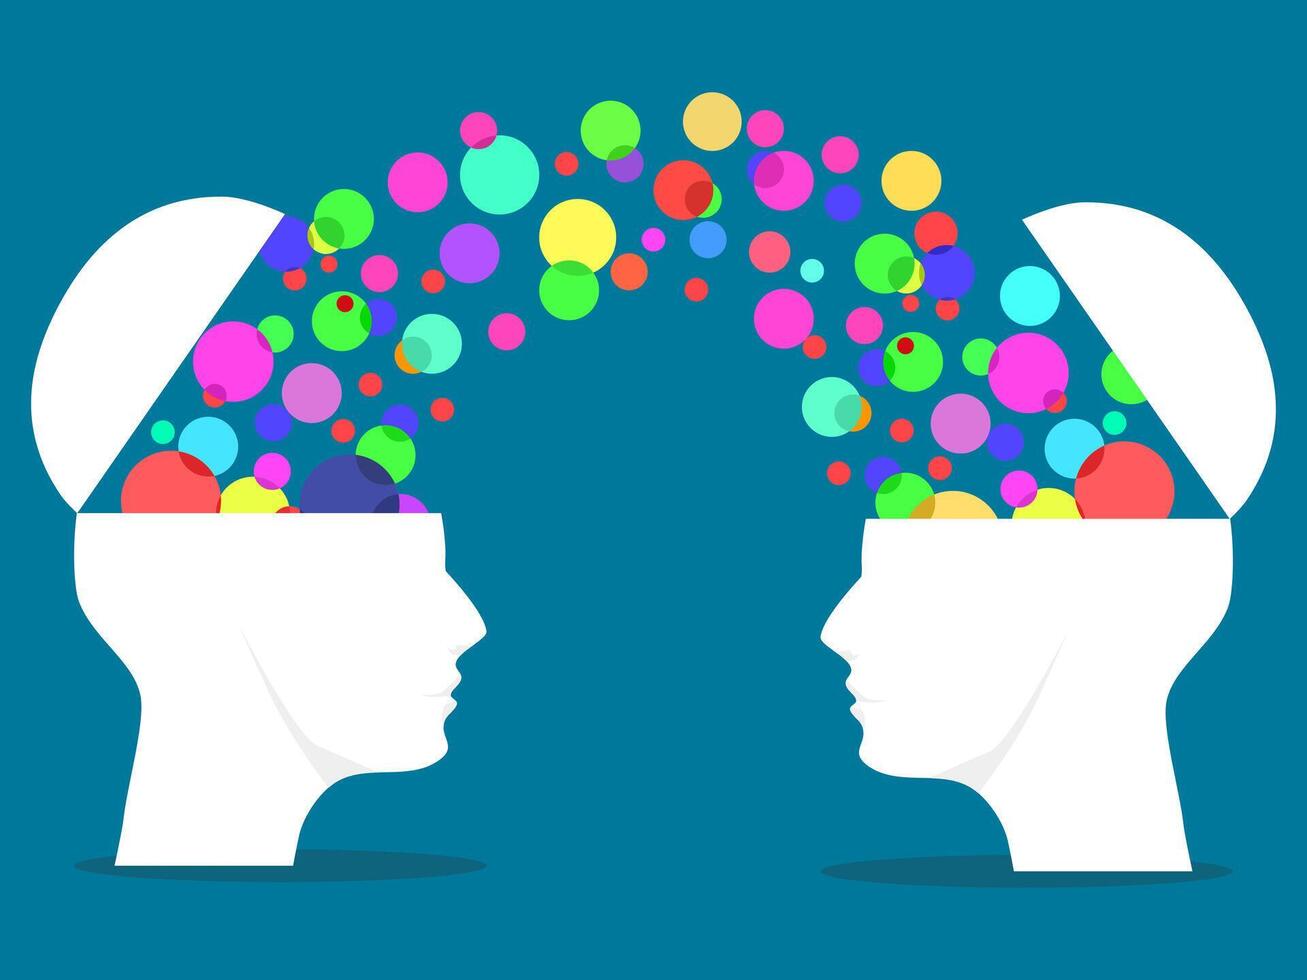 Two human beings are opened and multicolored thought bubbles vector